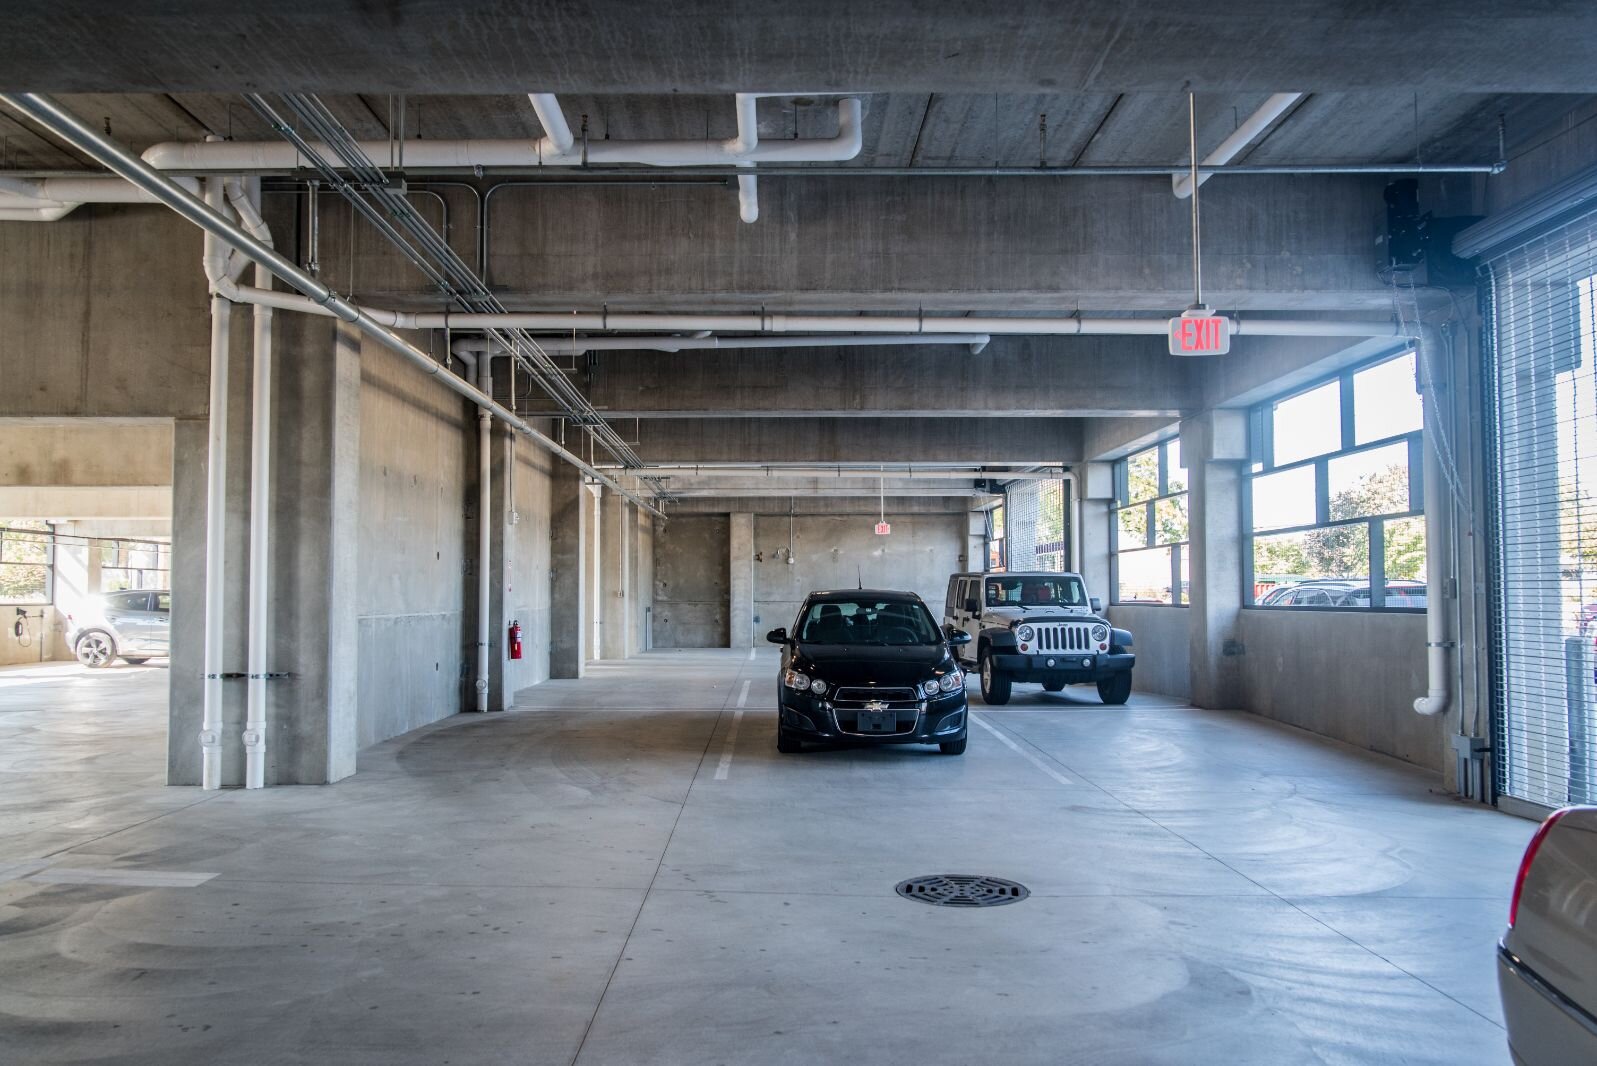 Indoor parking is available on the ground level of the residential/commercial development.